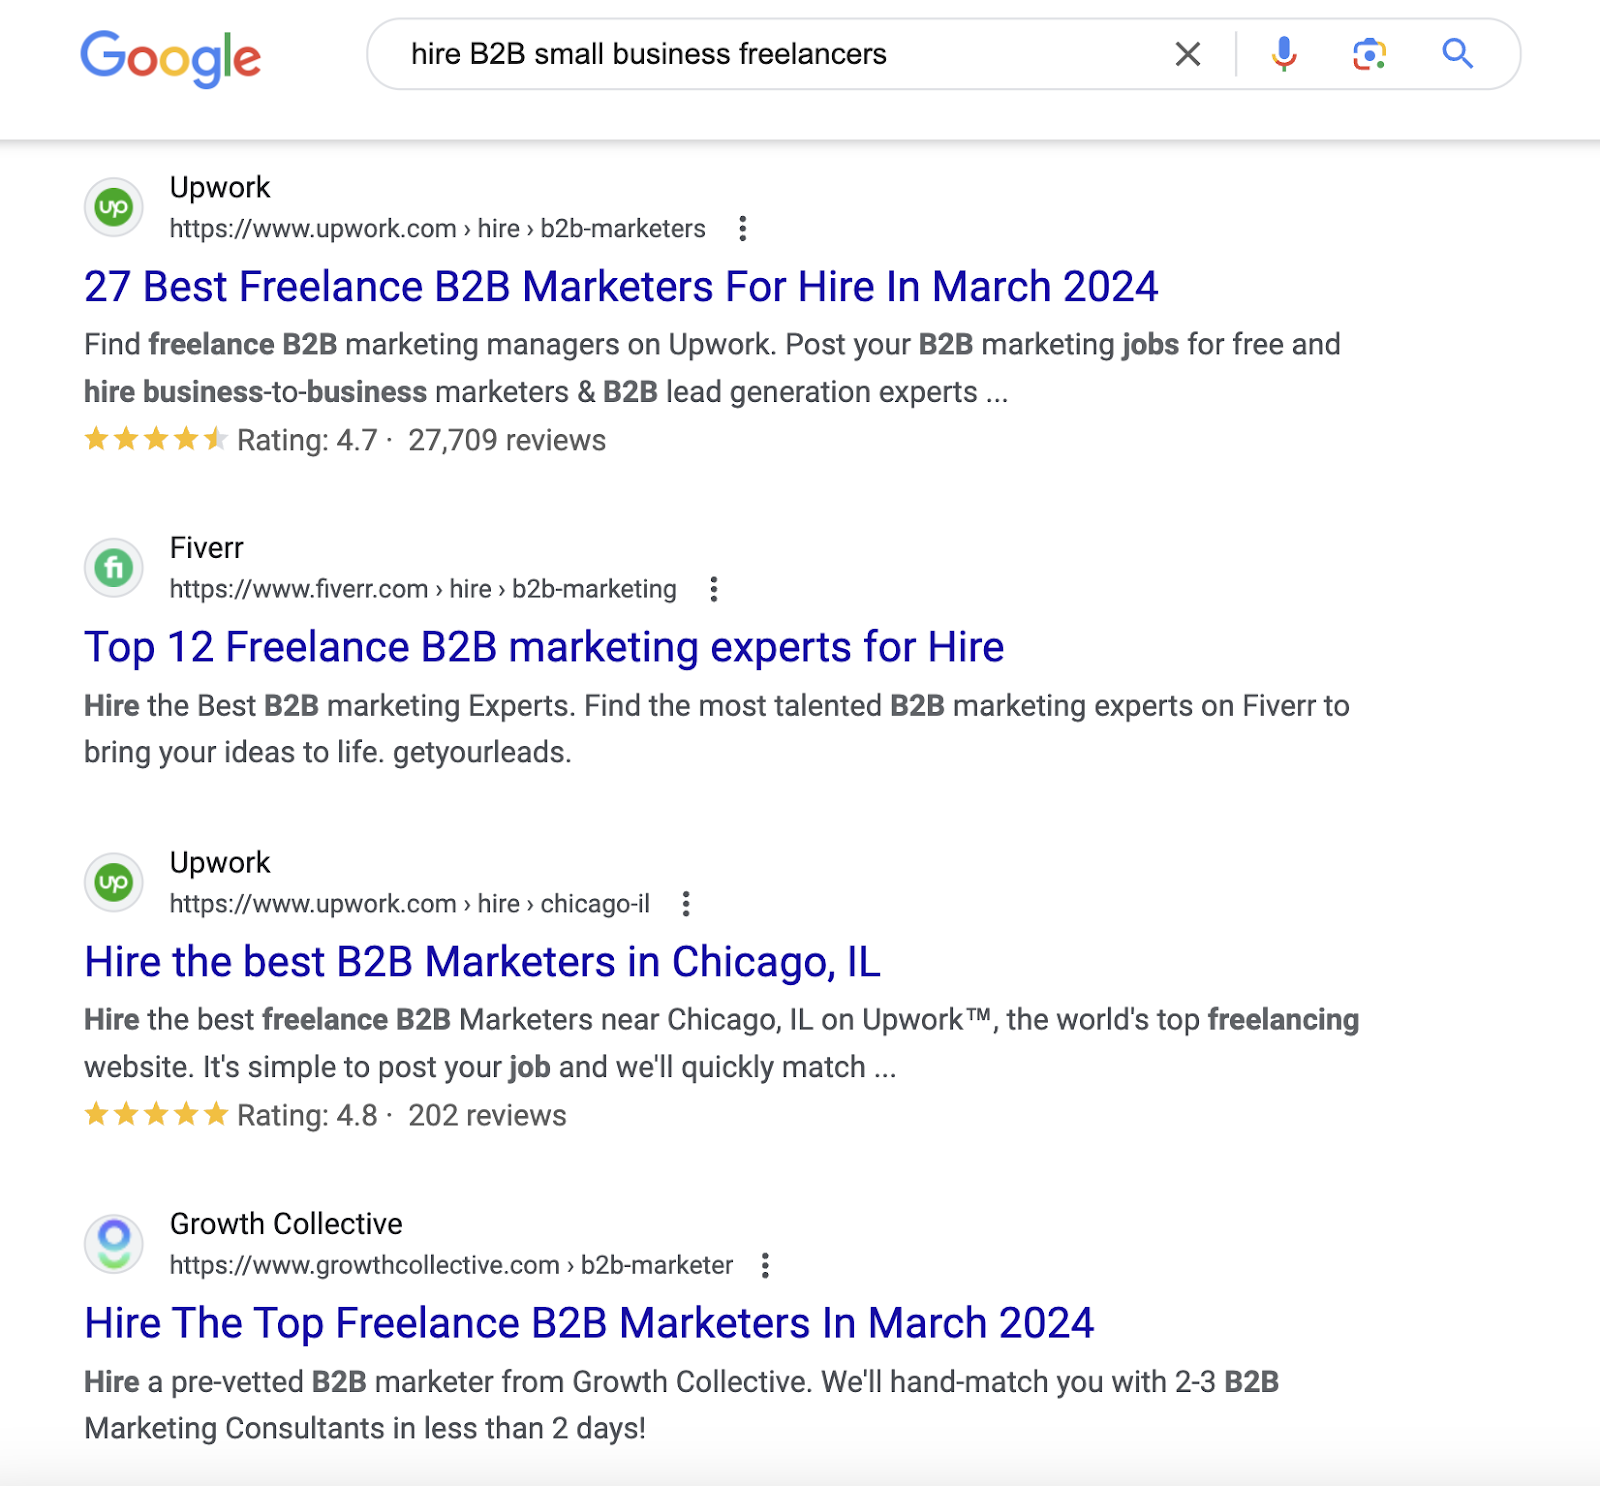 A Google hunt  for “hire B2B tiny  concern  freelancers” returns a assortment  of freelancer marketplaces and agencies for outsourcing writing.